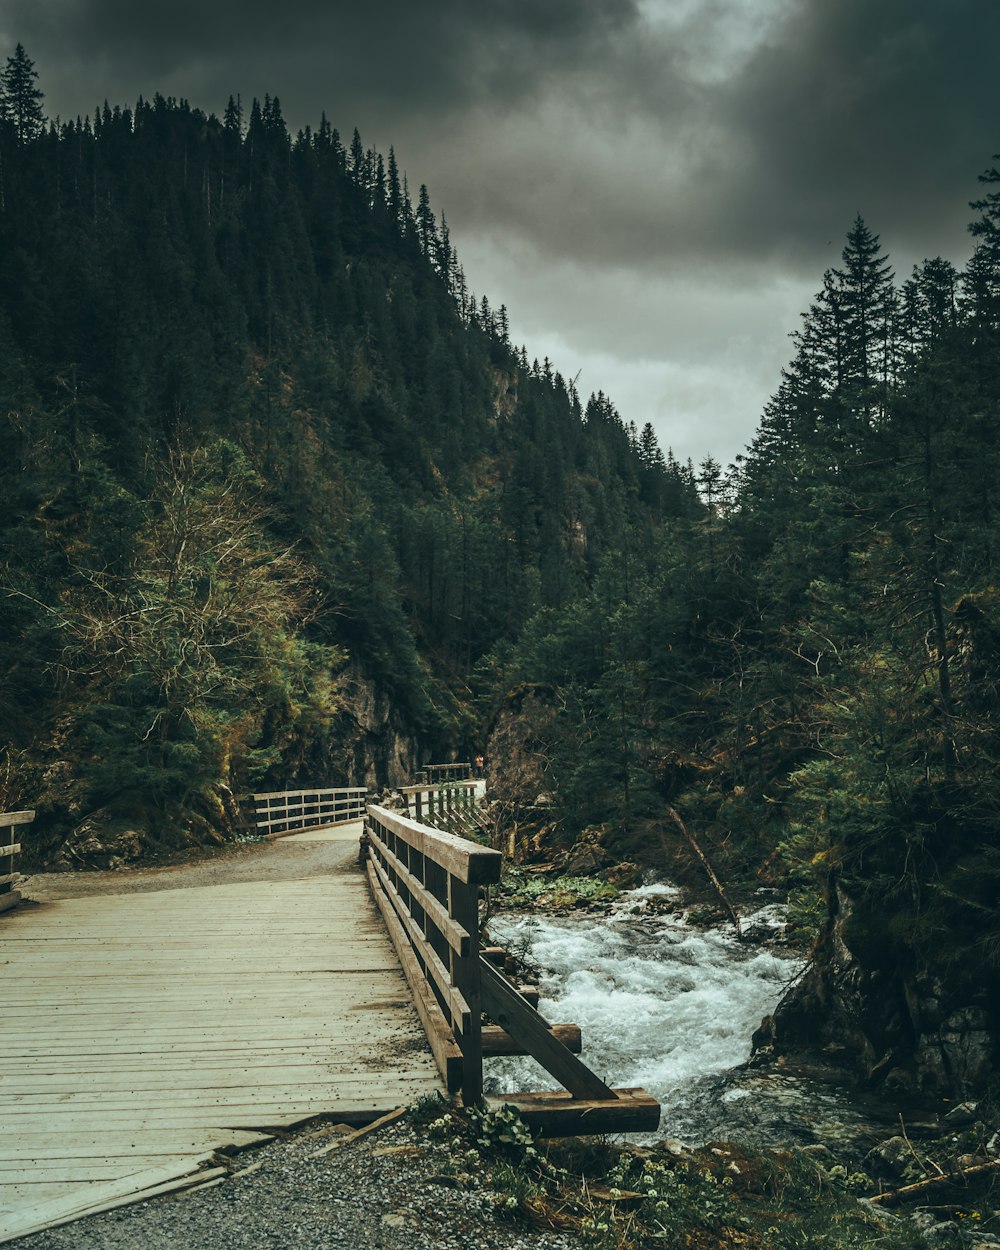 a wooden bridge over a rushing river in a forest